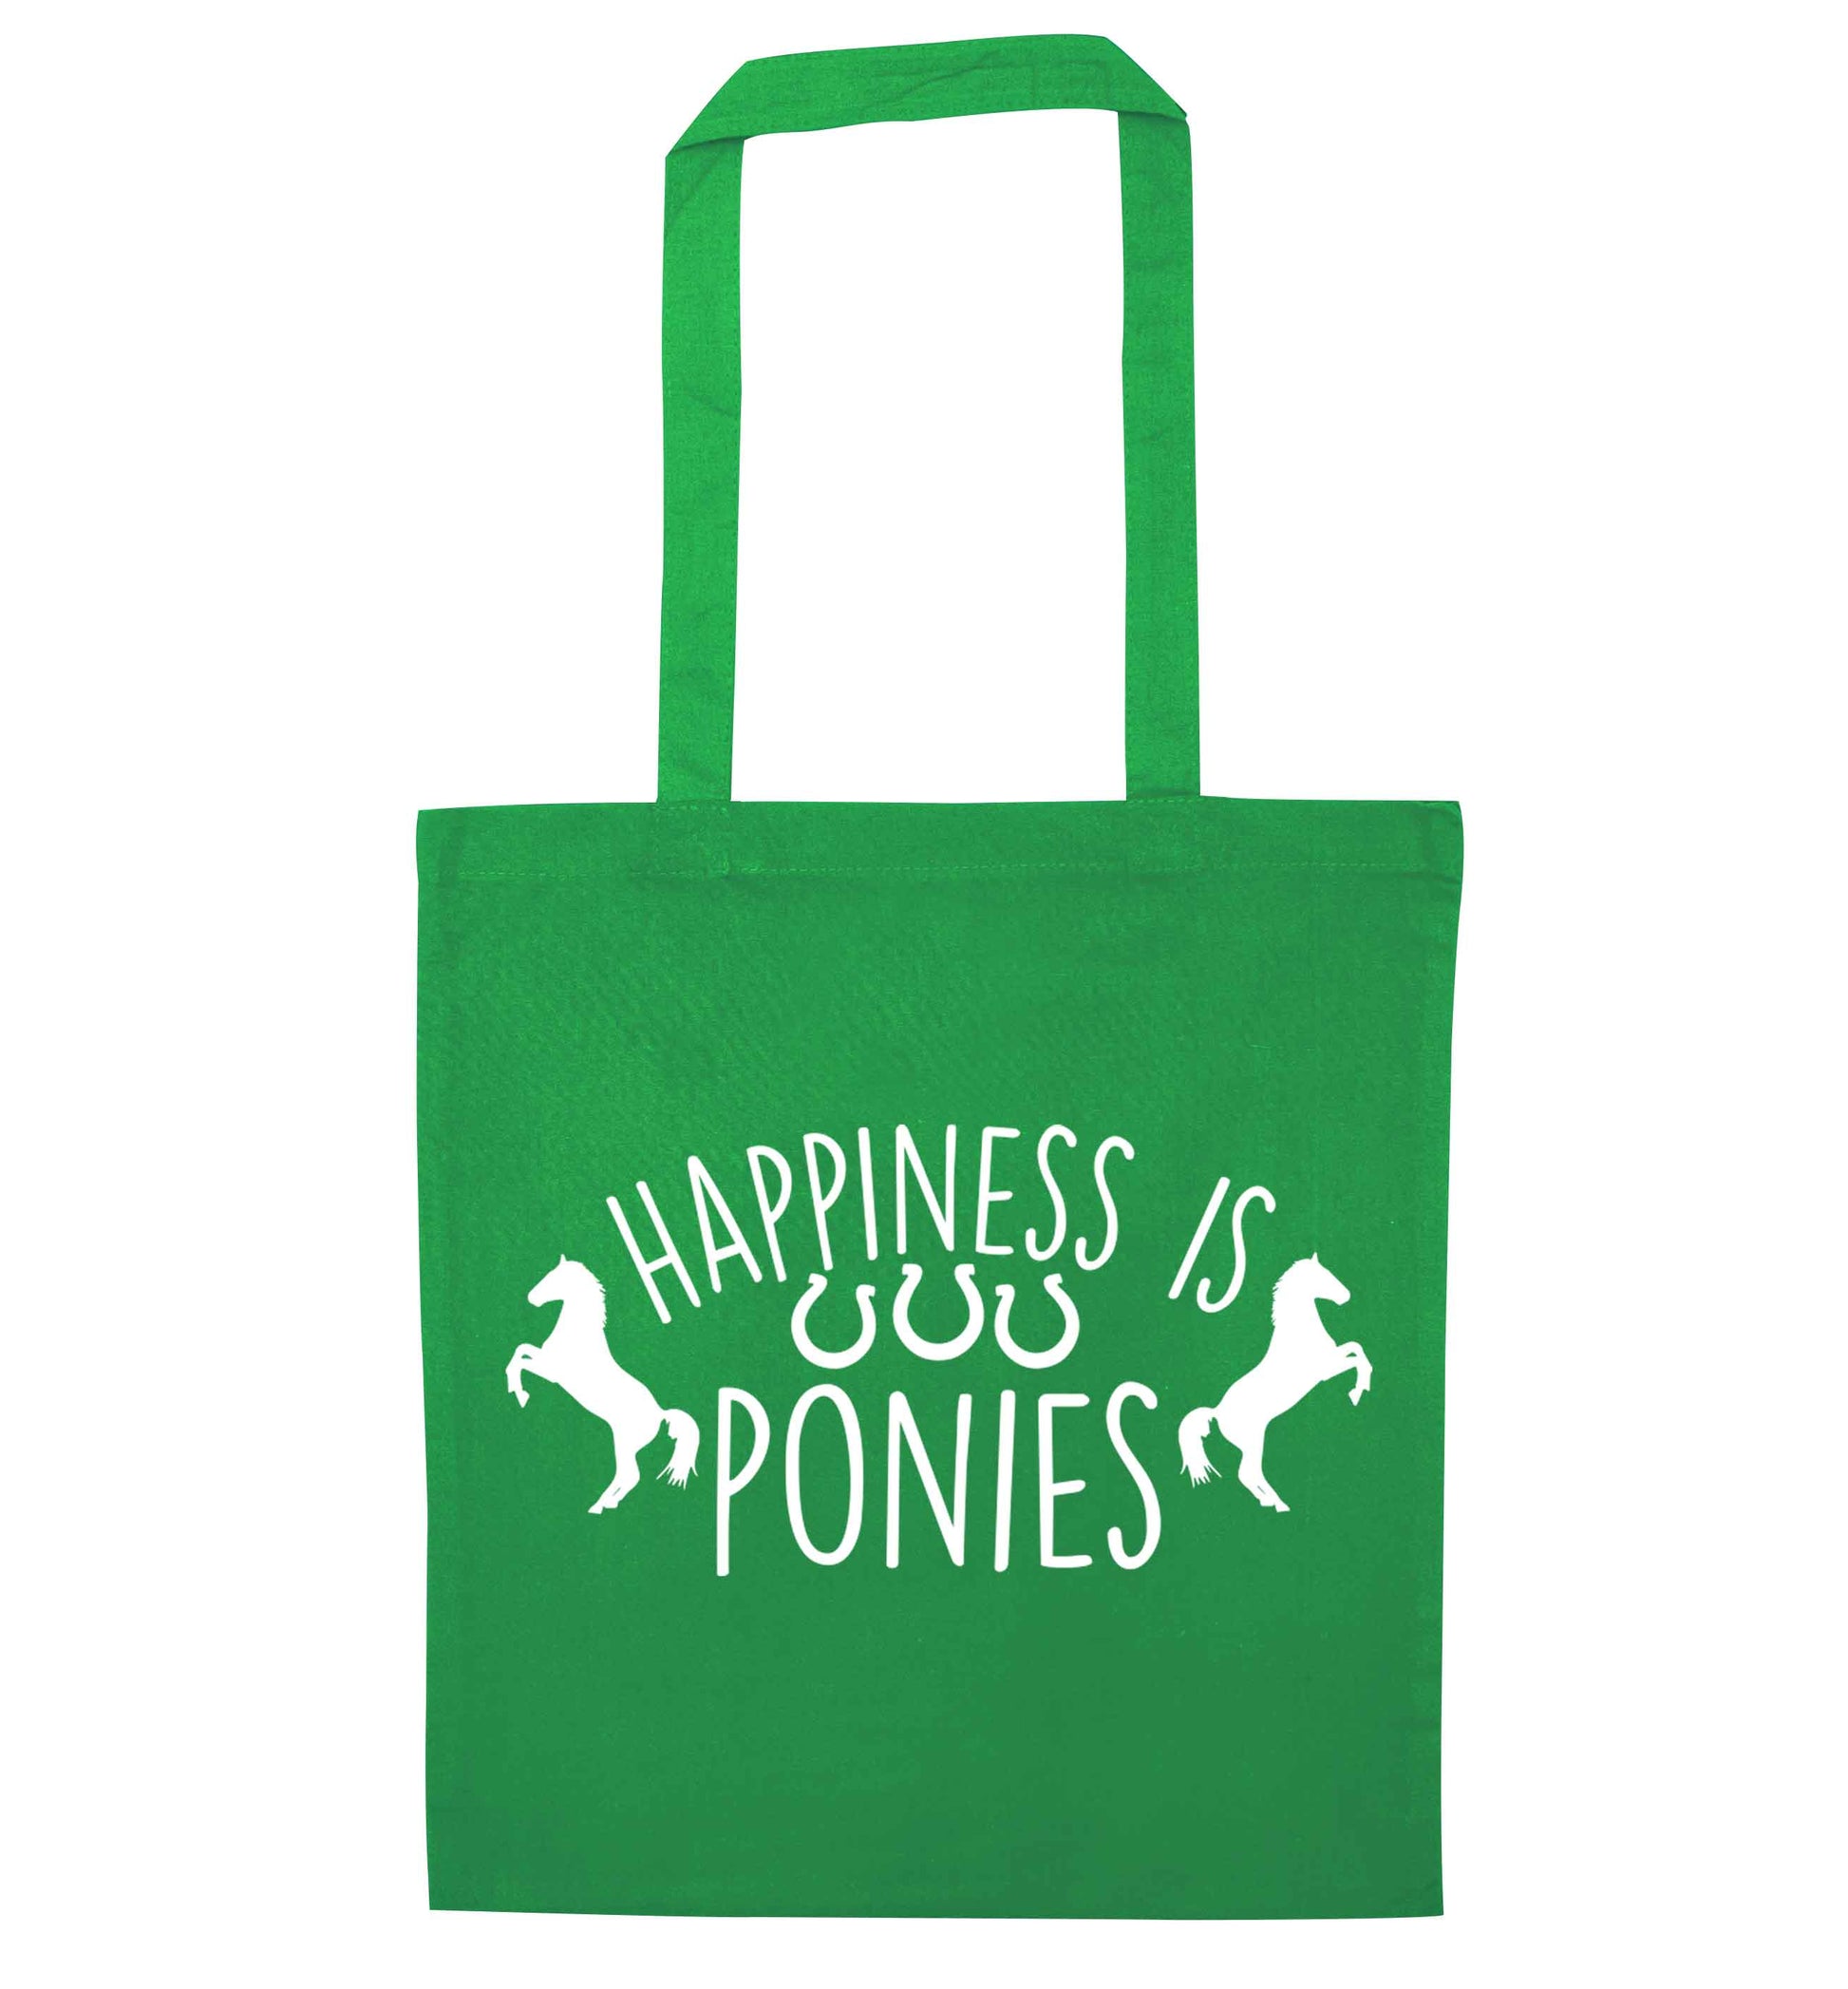 Happiness is ponies green tote bag